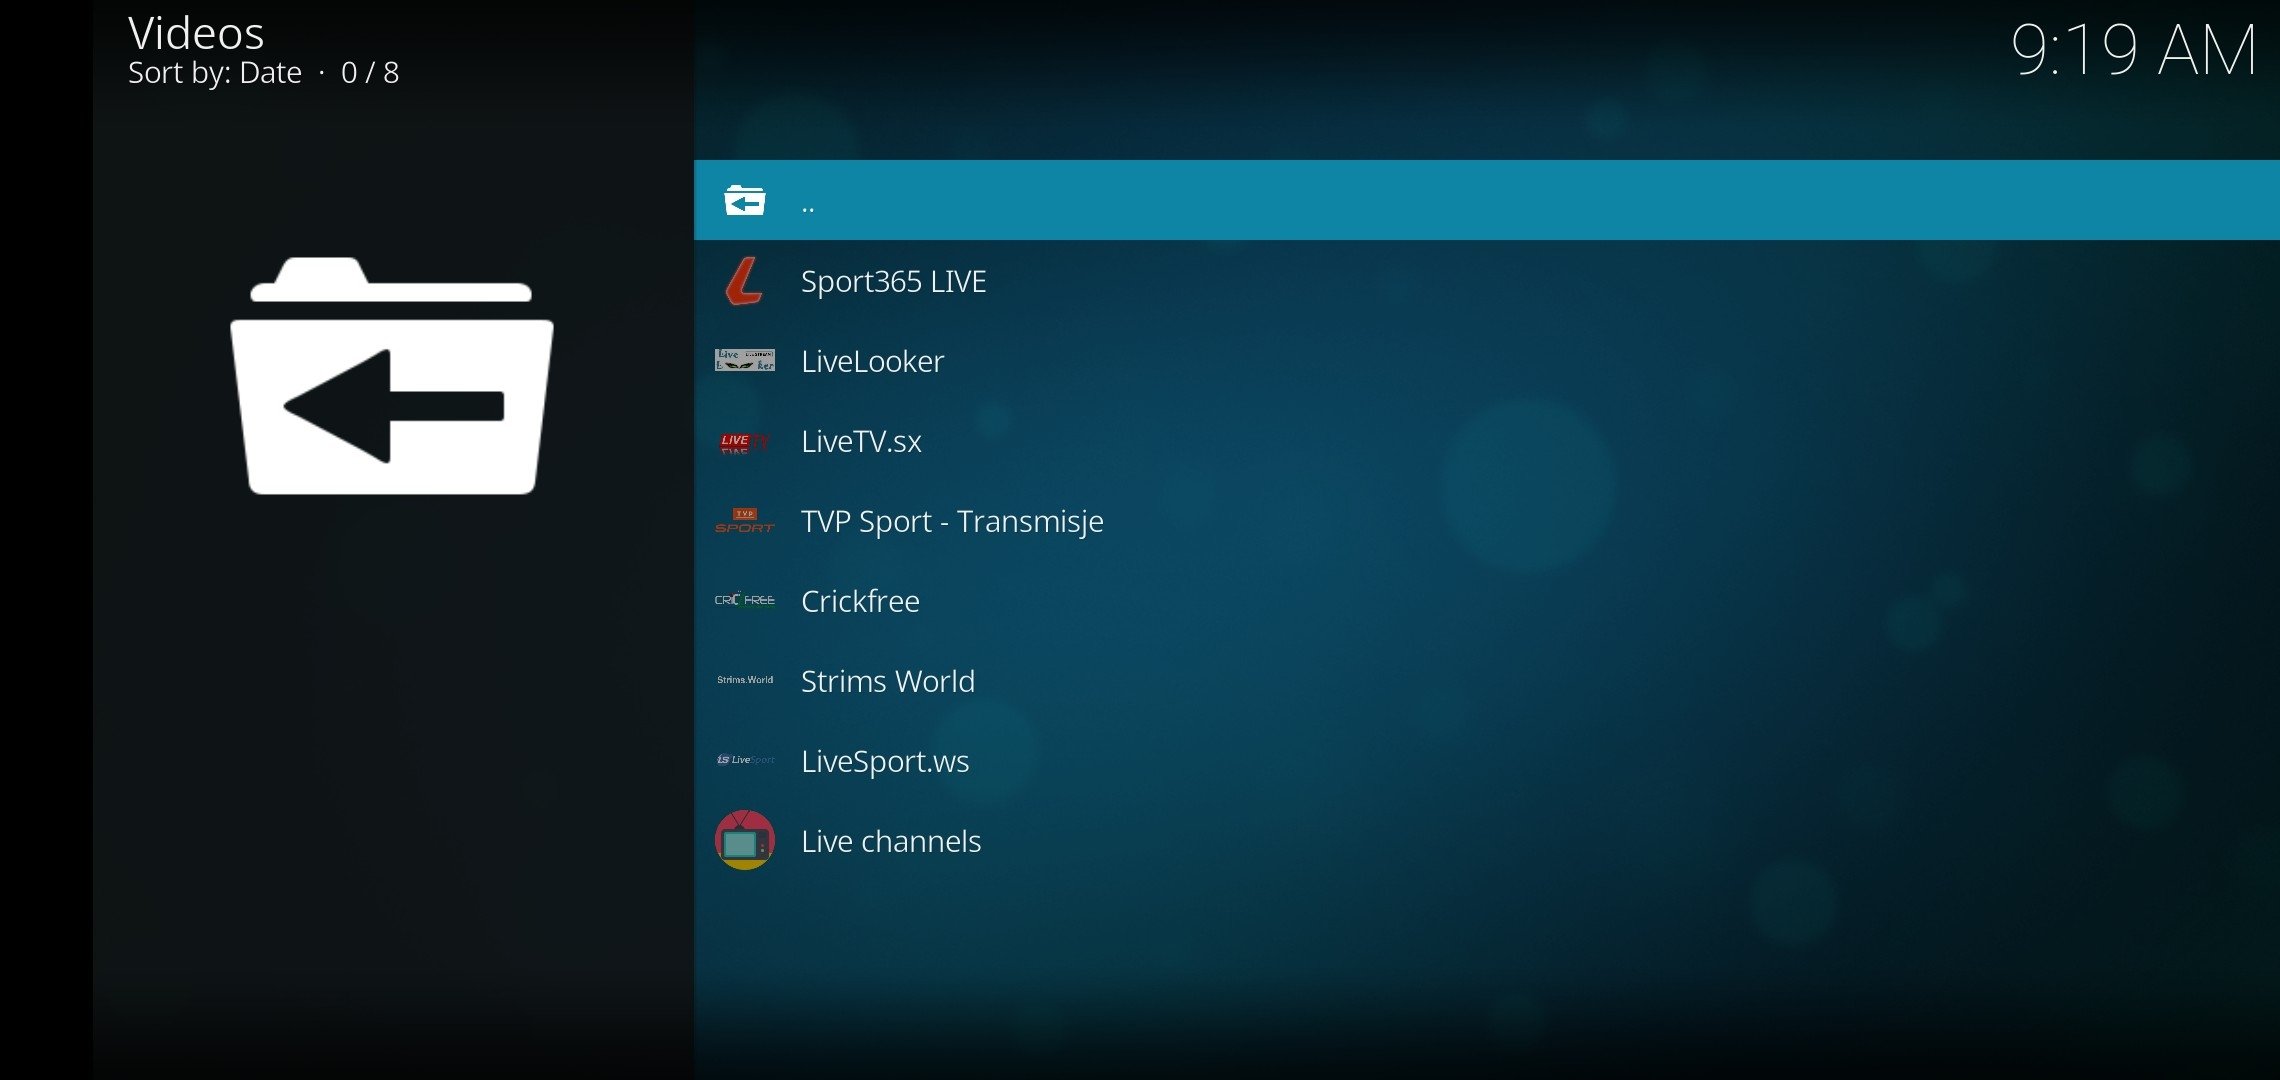 Sportowa TV APK Download for Android Free